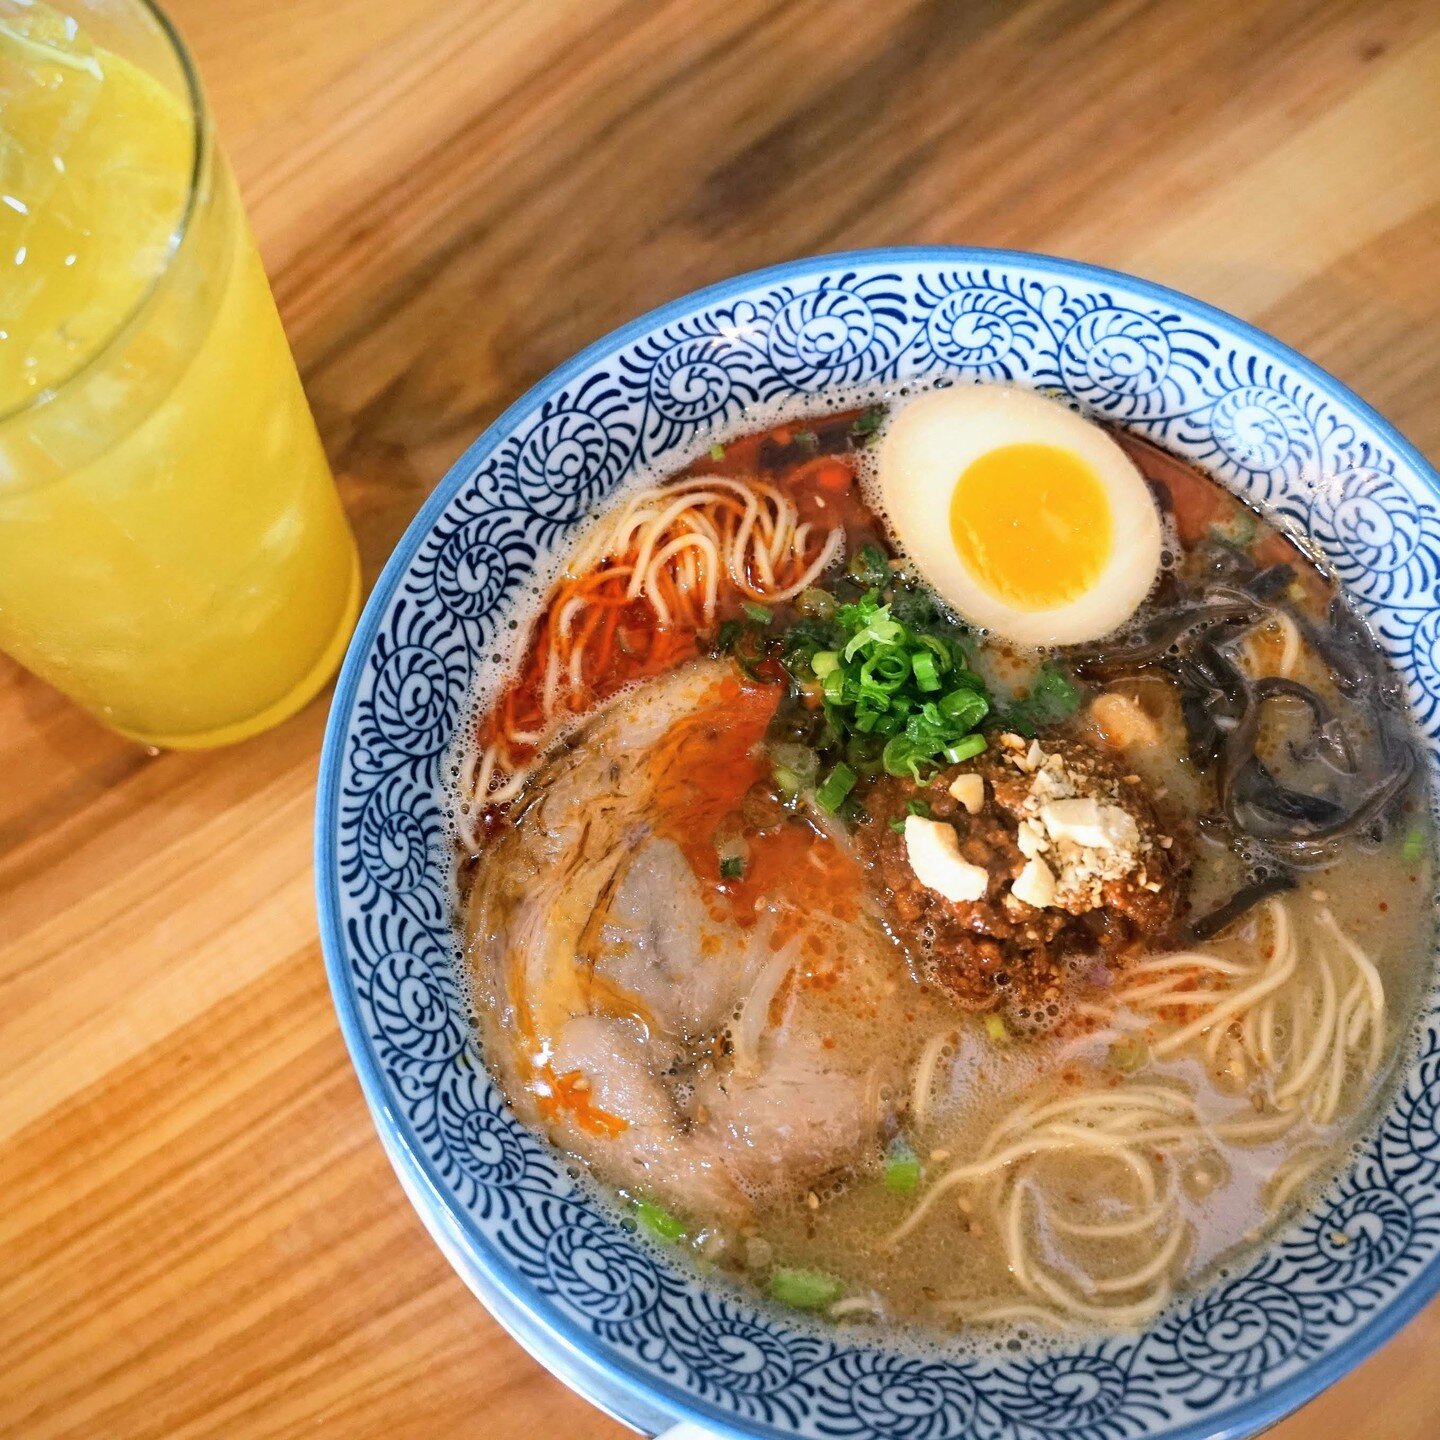 Come check our new and improved Tonkotsu Spicy topped with ground pork spicy bomb💥 It's a present to you right in time for Christmas💖

🍜JAPANESE RAMEN GACHI🍜
📍2268 W Holcombe Blvd, Houston, TX 77030

#ramengachi #houstonrestaurant #houstonramen 